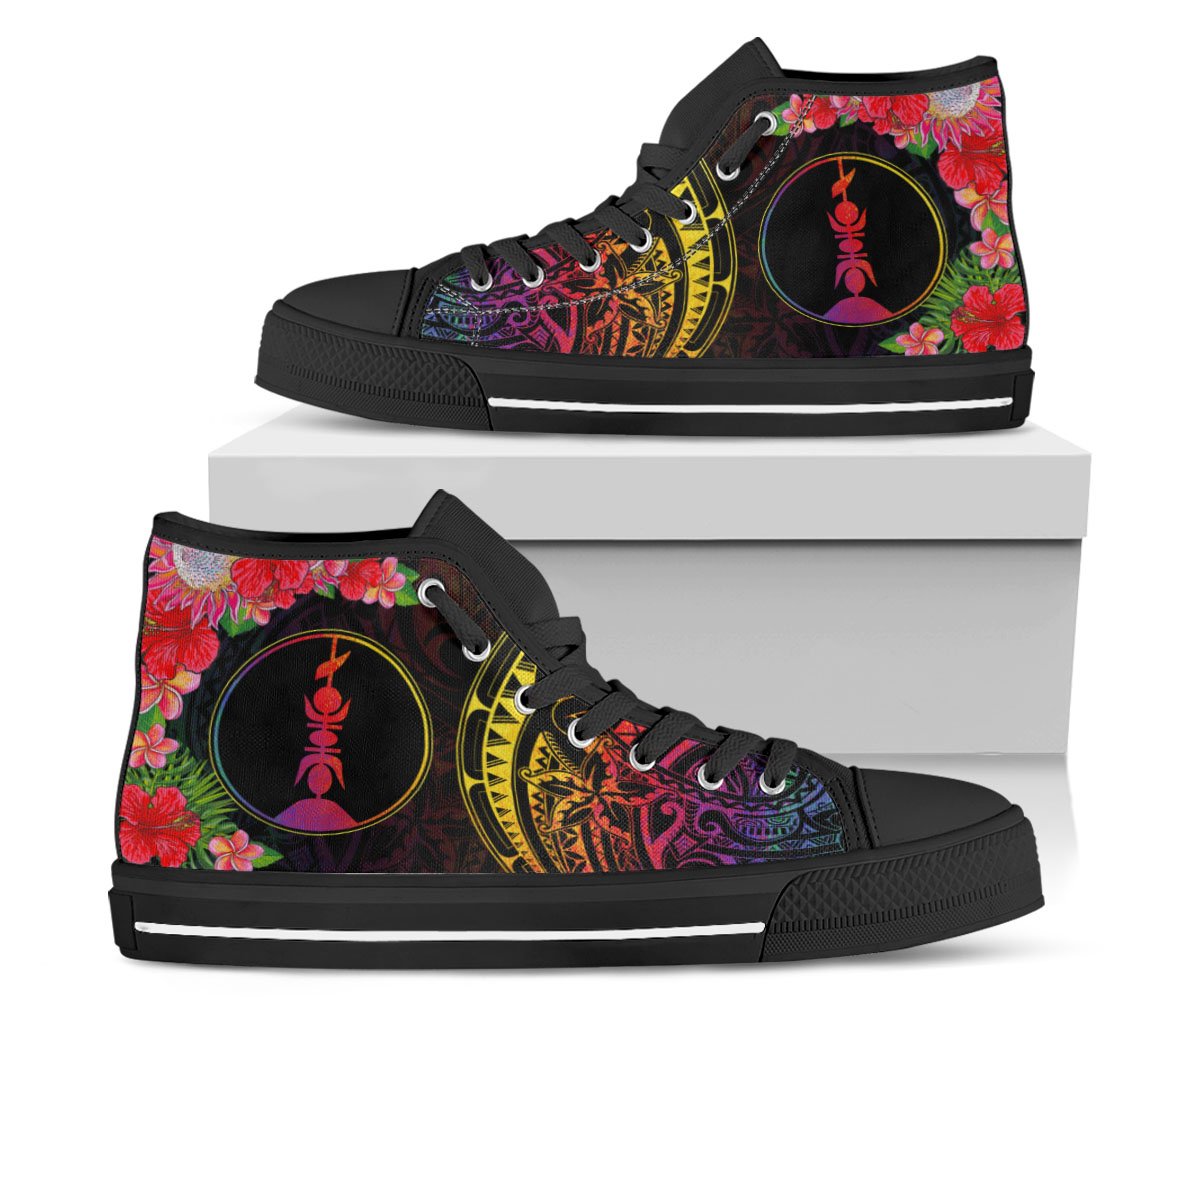 New Caledonia High Top Shoes - Tropical Hippie Style Unisex Black - Polynesian Pride